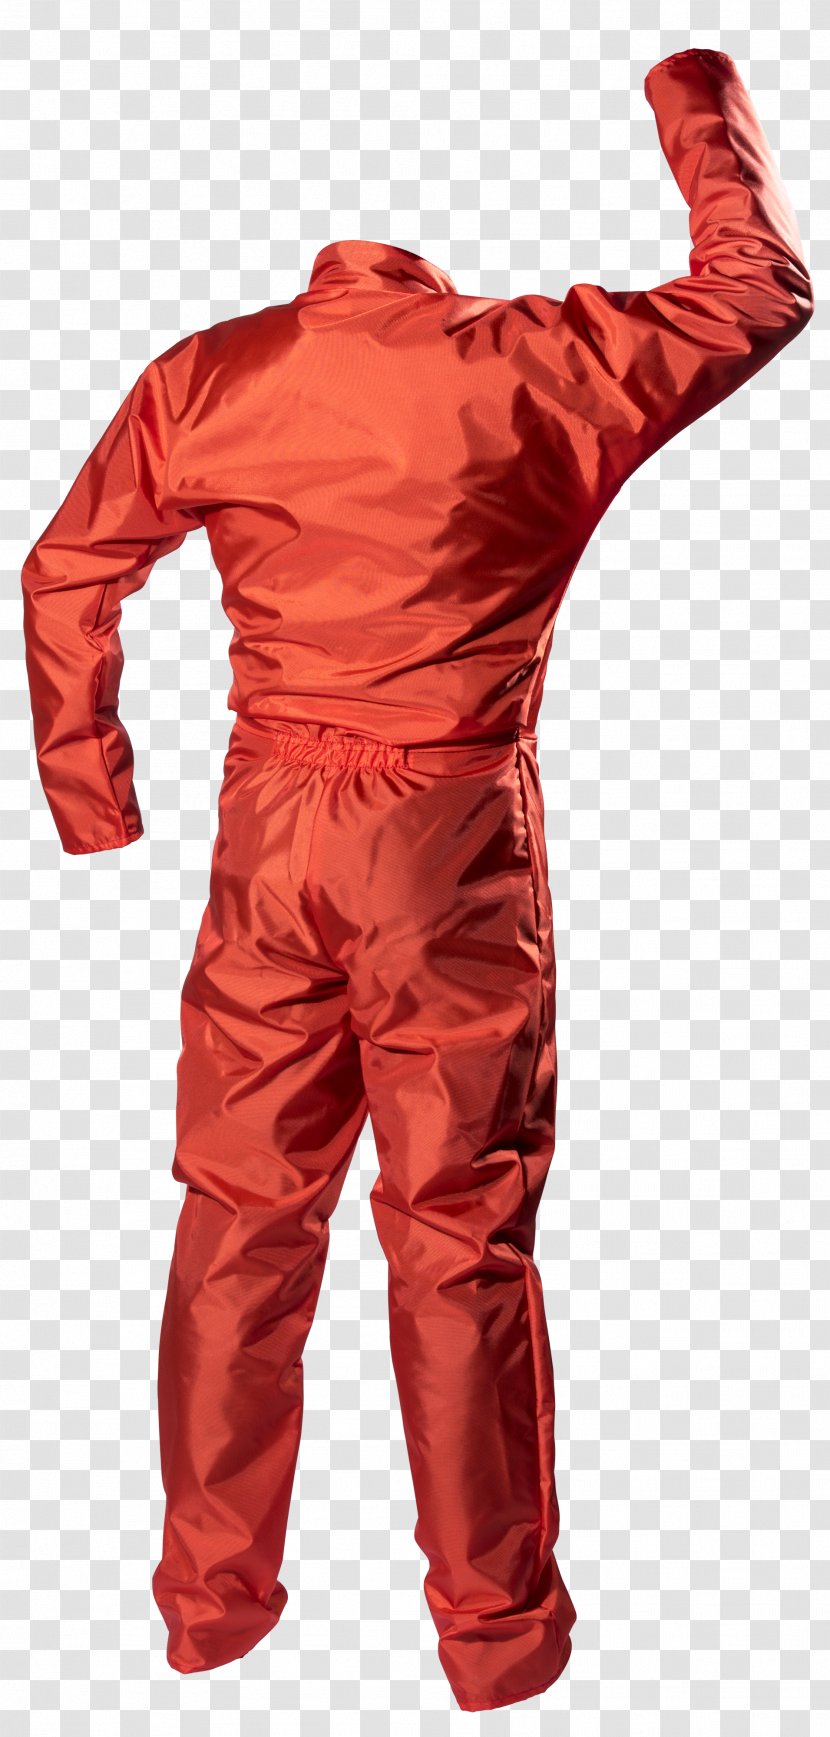 Boilersuit Speleology Caving Outerwear - Red - Overalls Transparent PNG